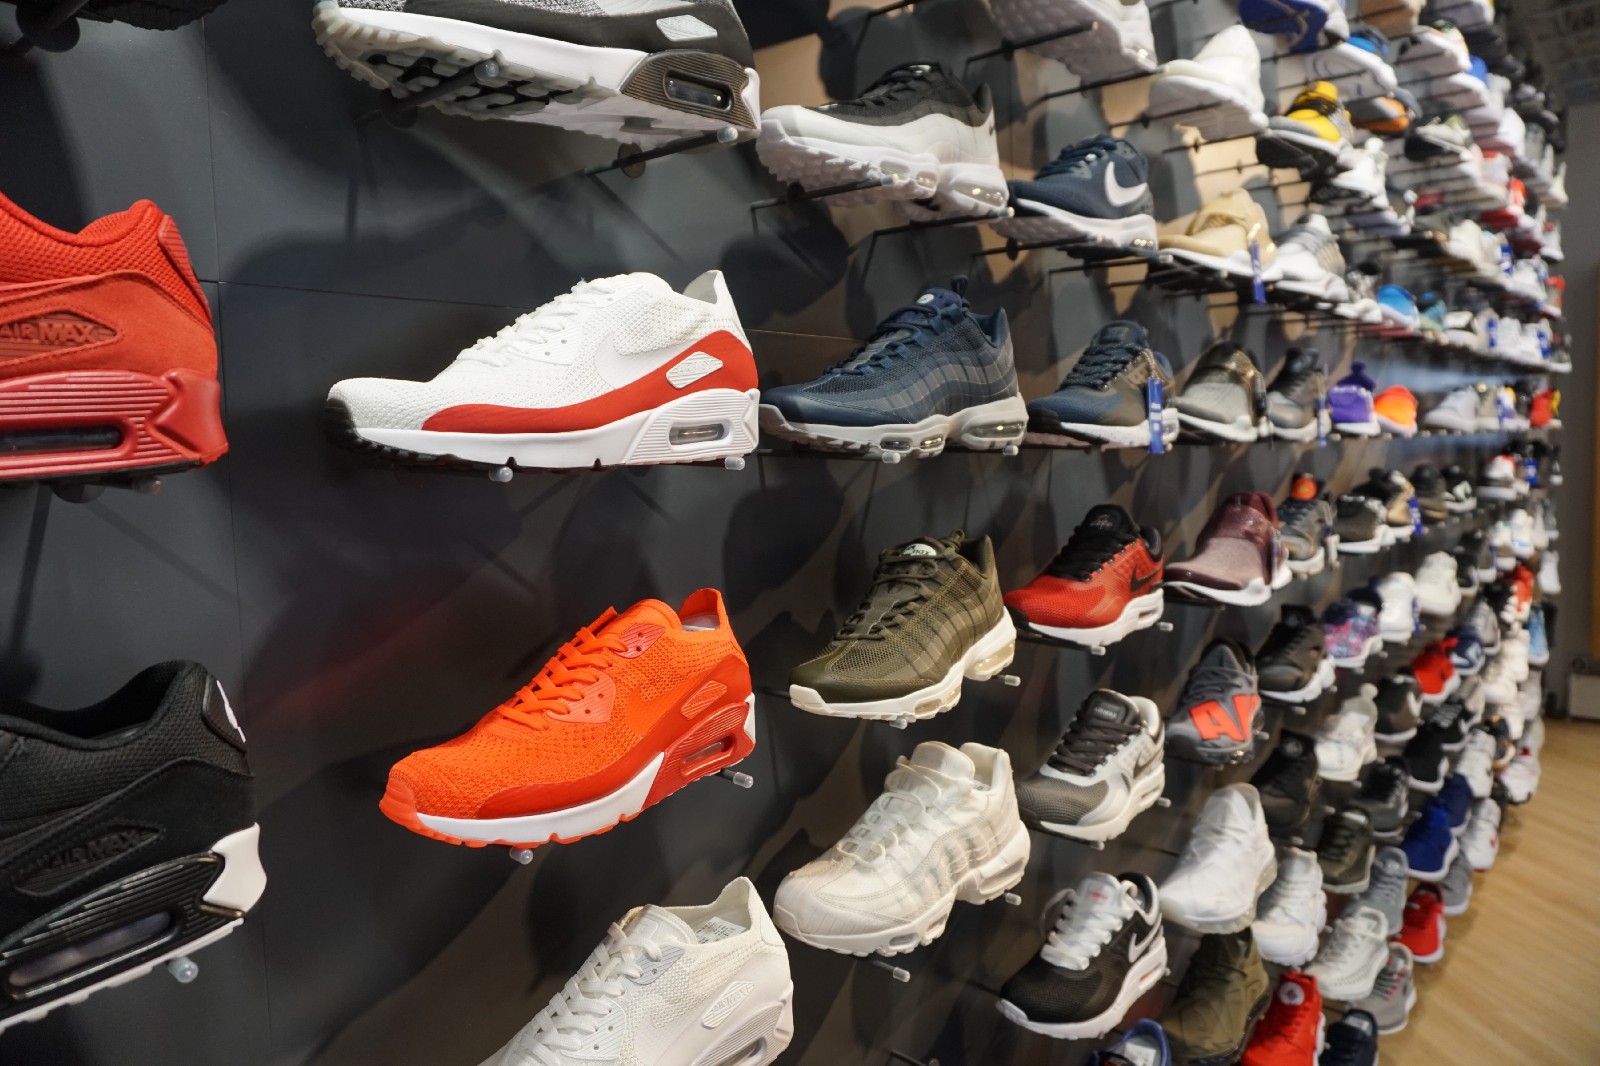 The collection of cool kicks at a sneaker store in Shinjuku